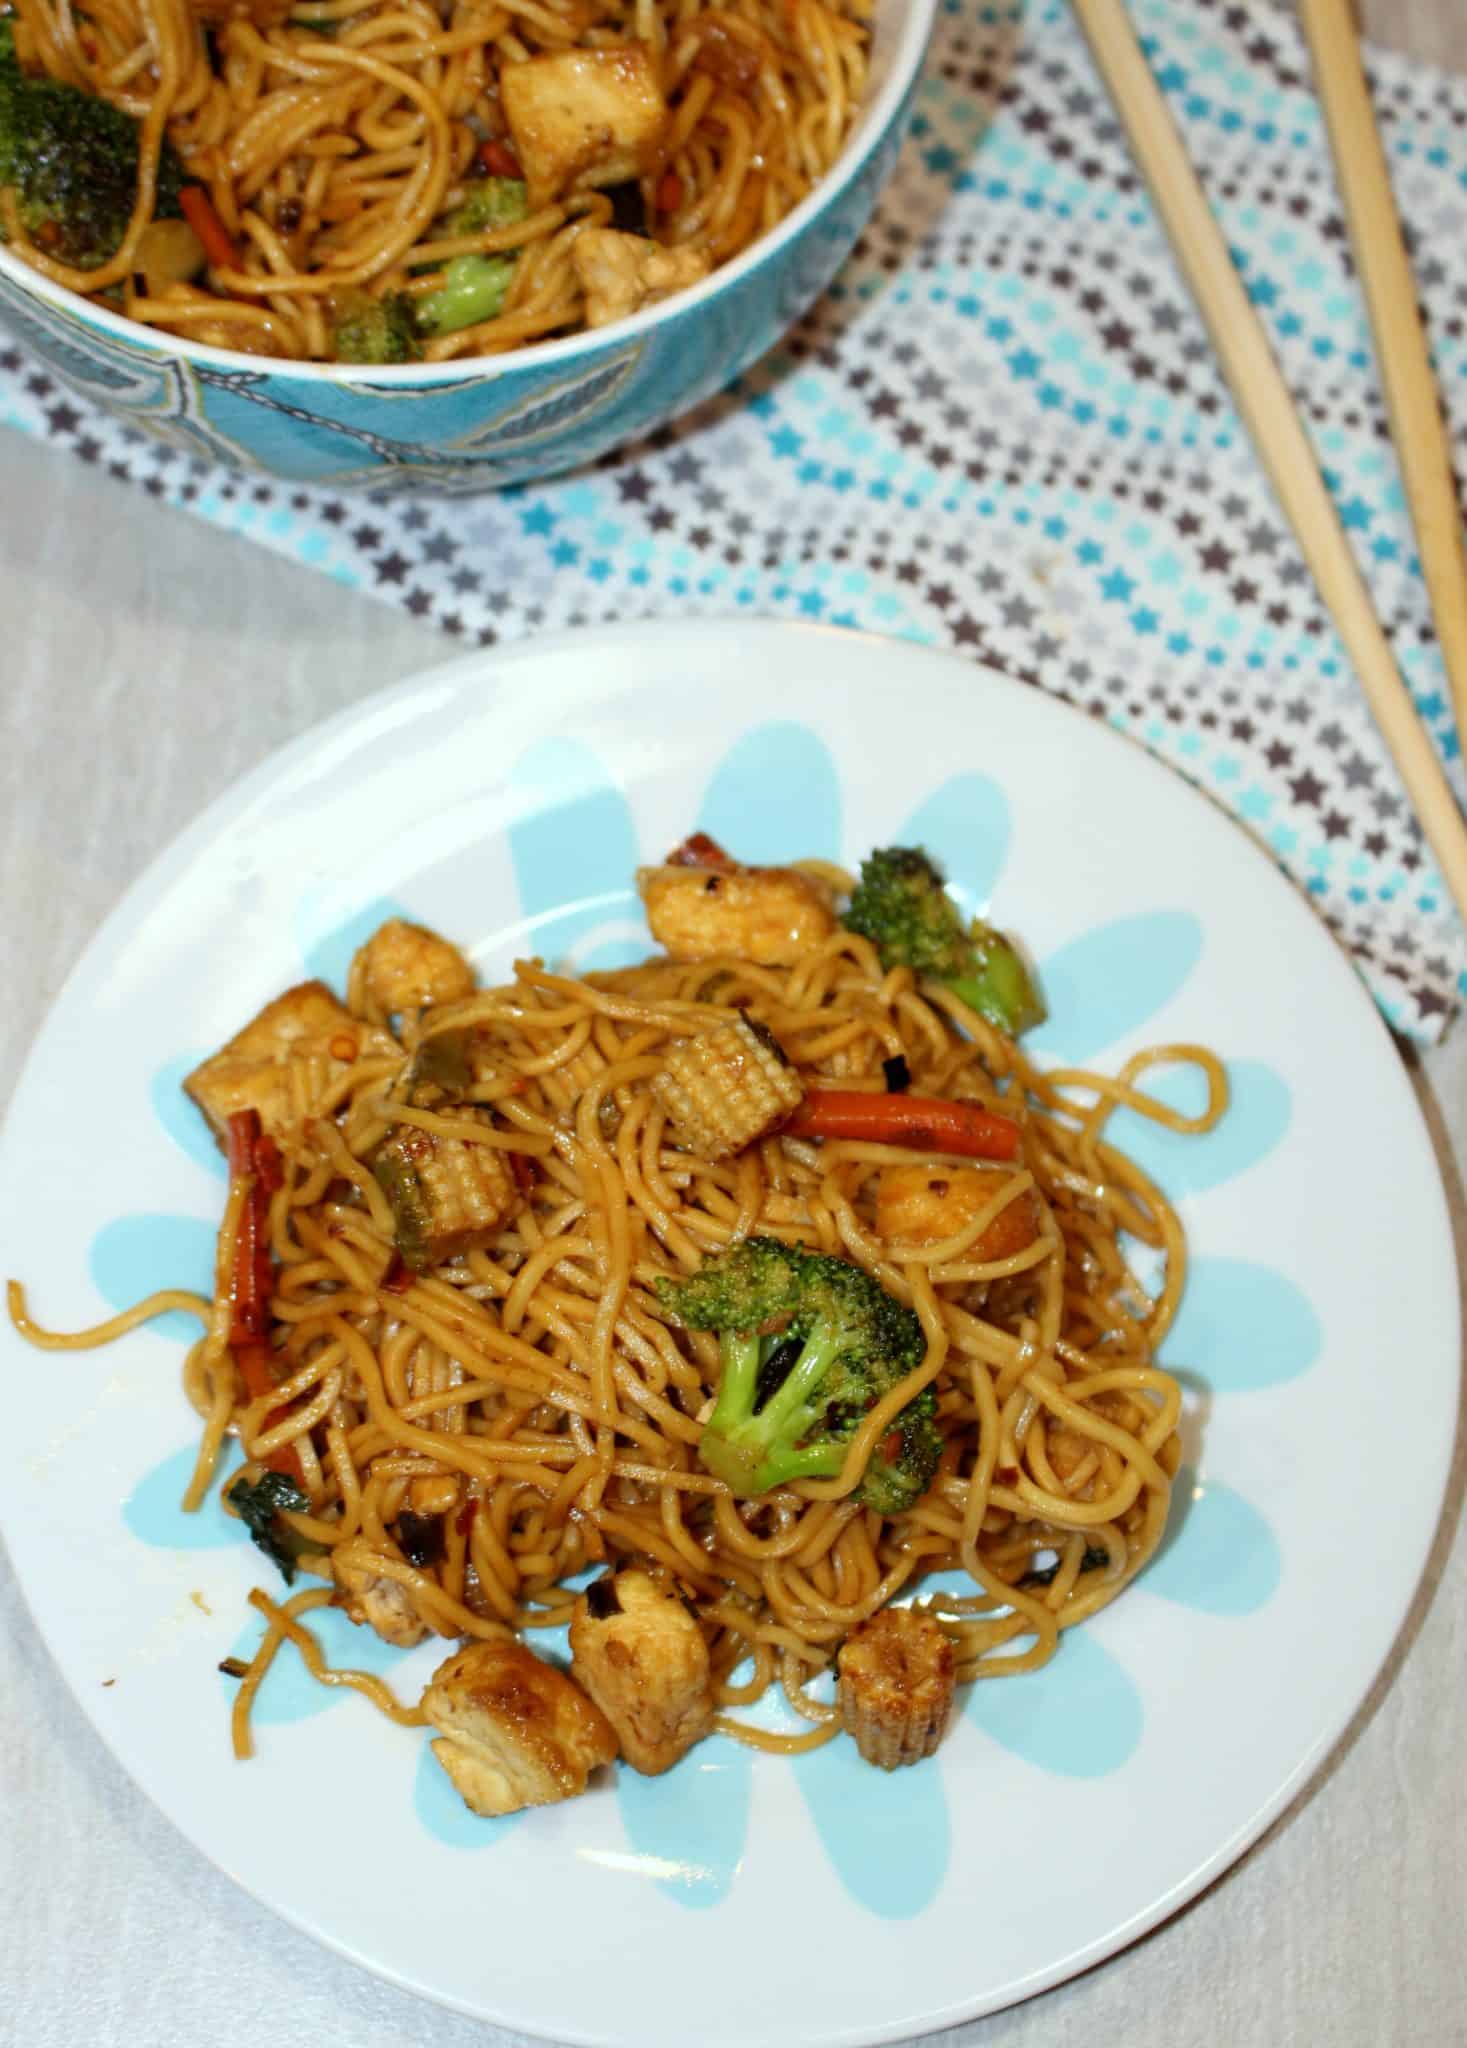 Chinese Vegetable and Tofu Lo Mein in a Plate